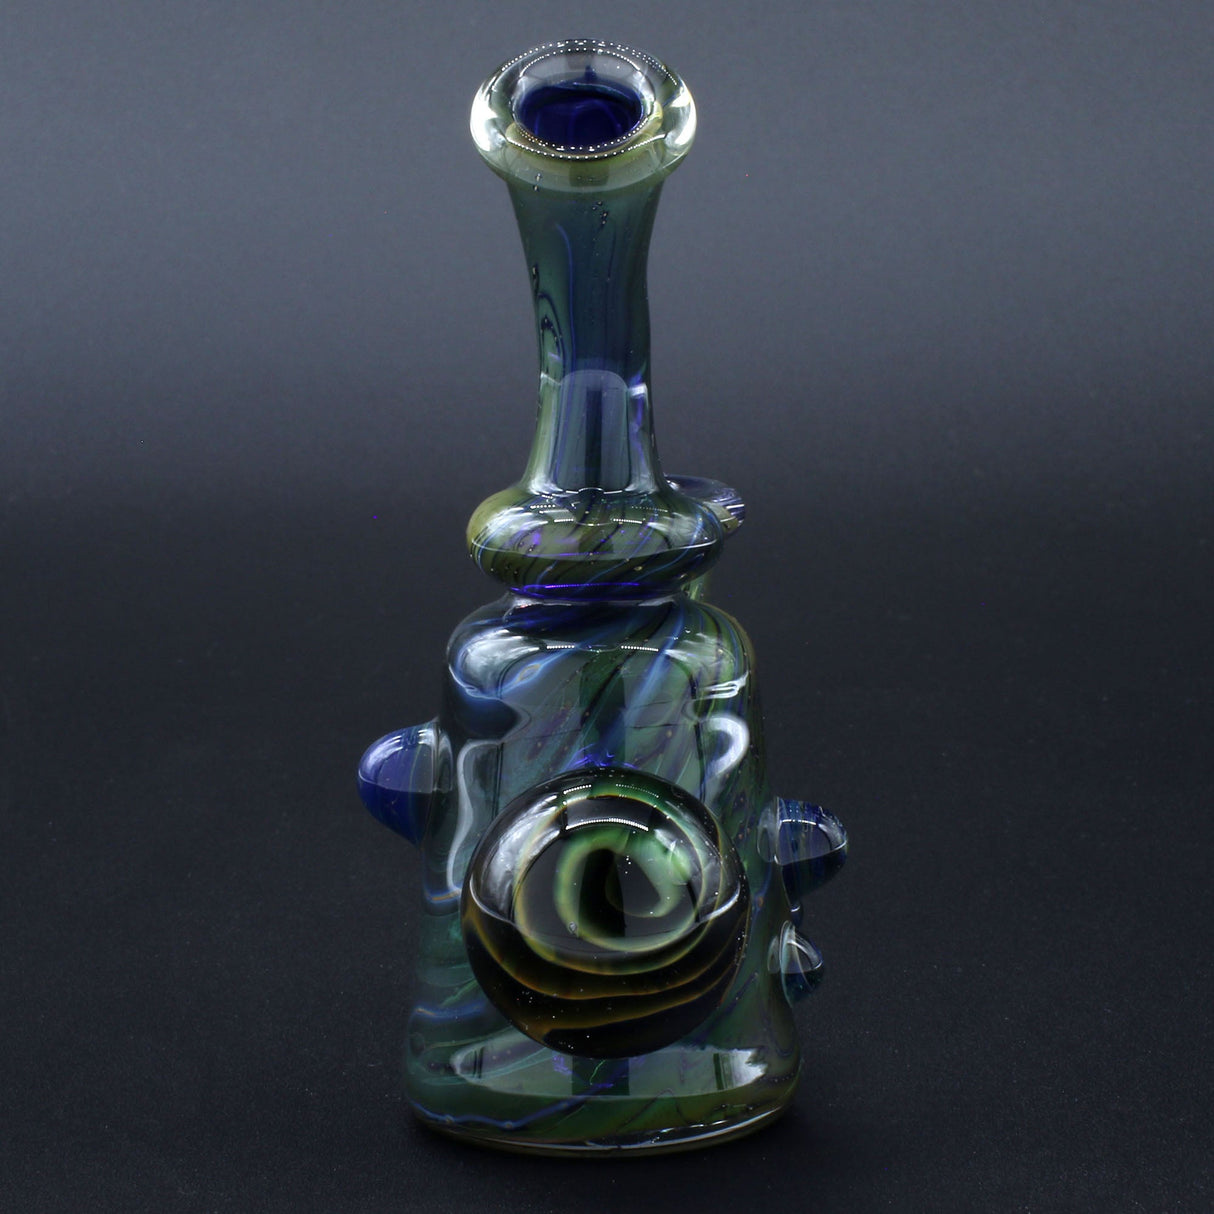 Clayball Glass "Dichroic Dreams" Heady Sherlock Dab Rig, USA made, 5" height, 14mm joint, on black background